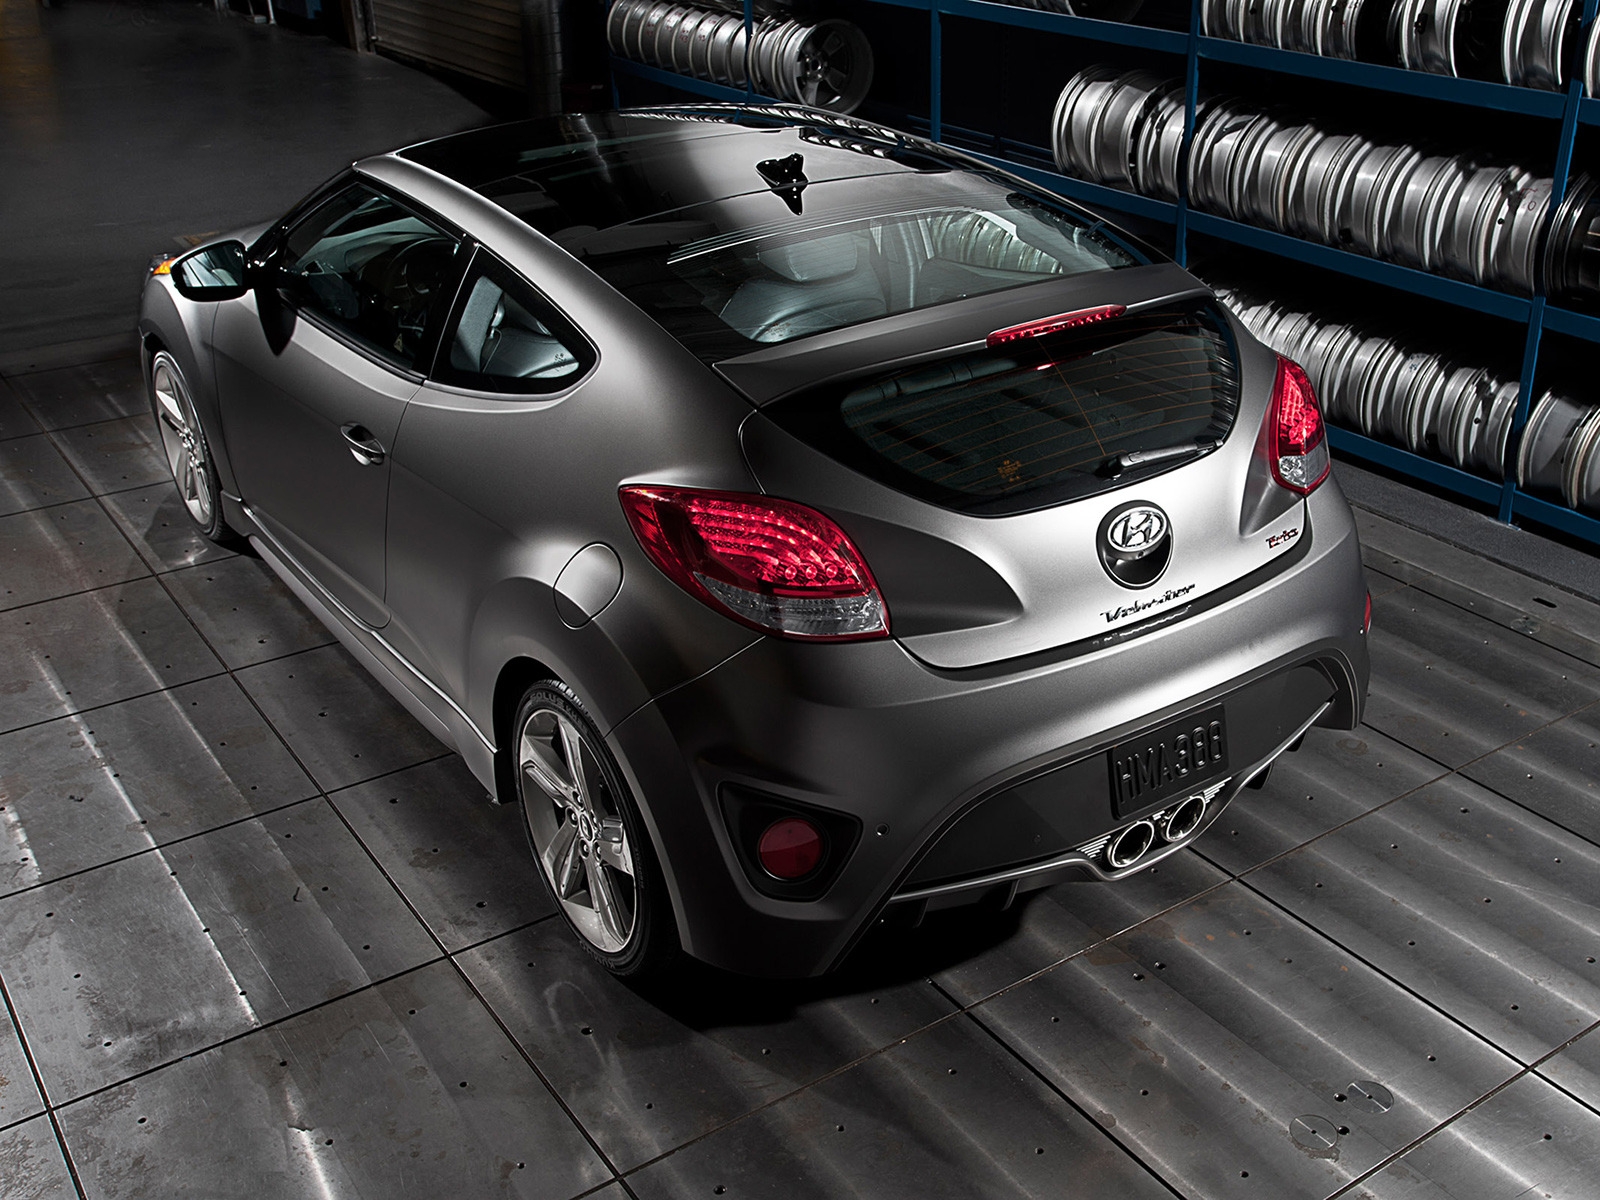 Hyundai Veloster Turbo 2013 Edition for 1600 x 1200 resolution